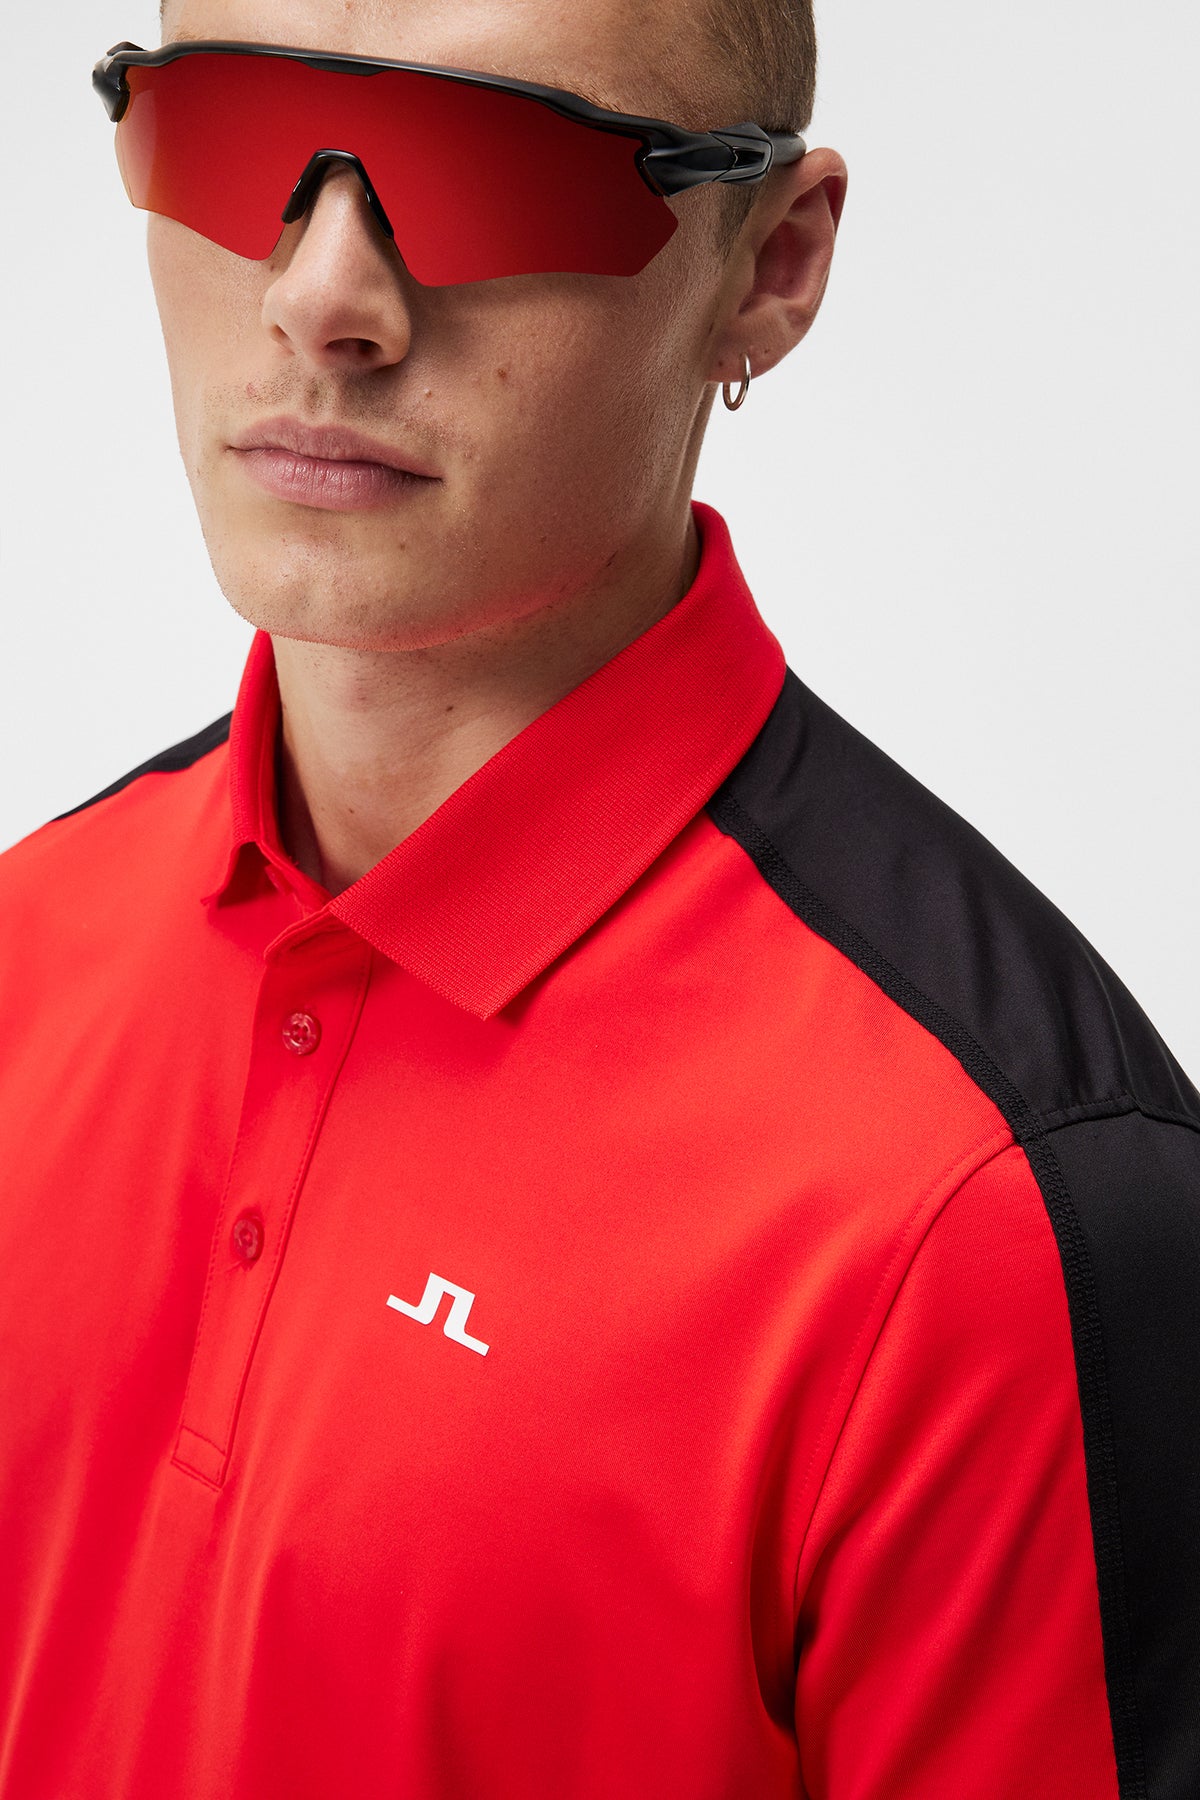 Hans Regular Fit Polo / Fiery Red